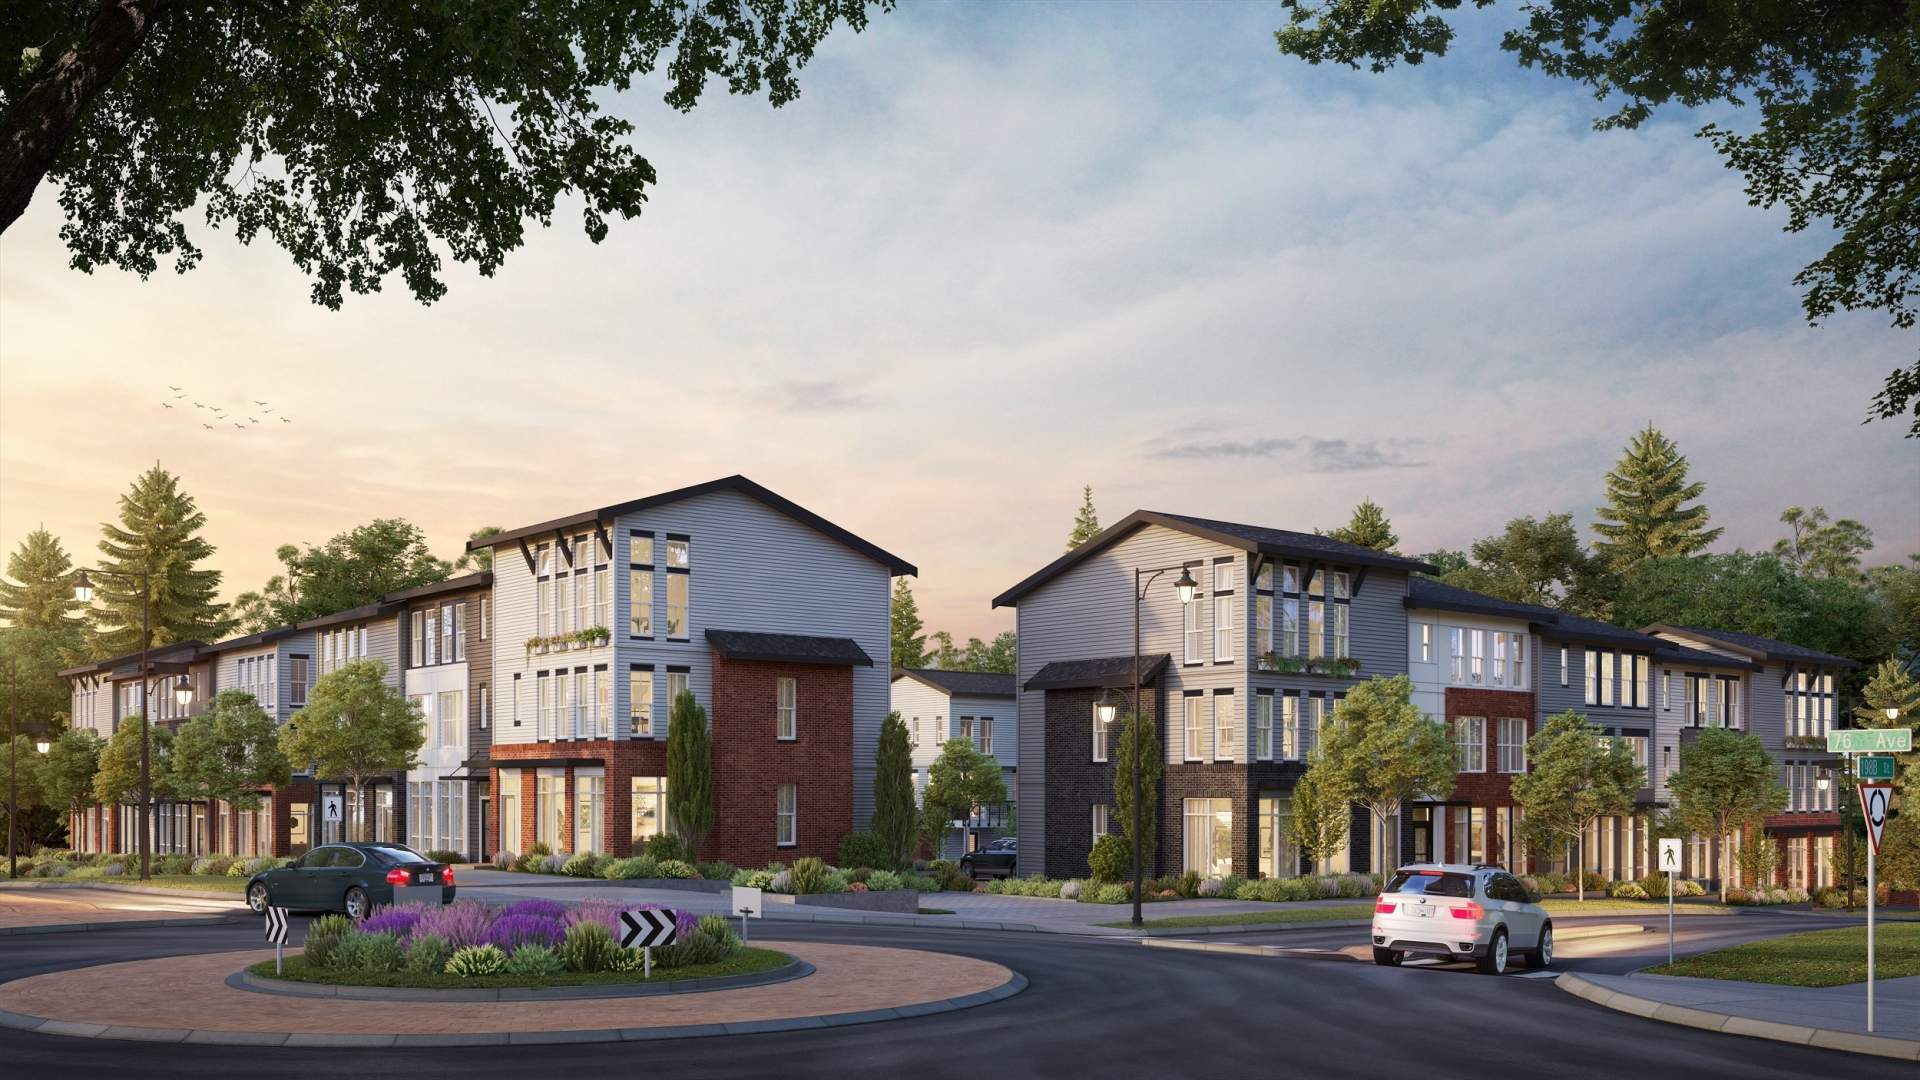 Coming soon to West Latimer, a collection of 22 x 3-bedroom live-work townhomes.